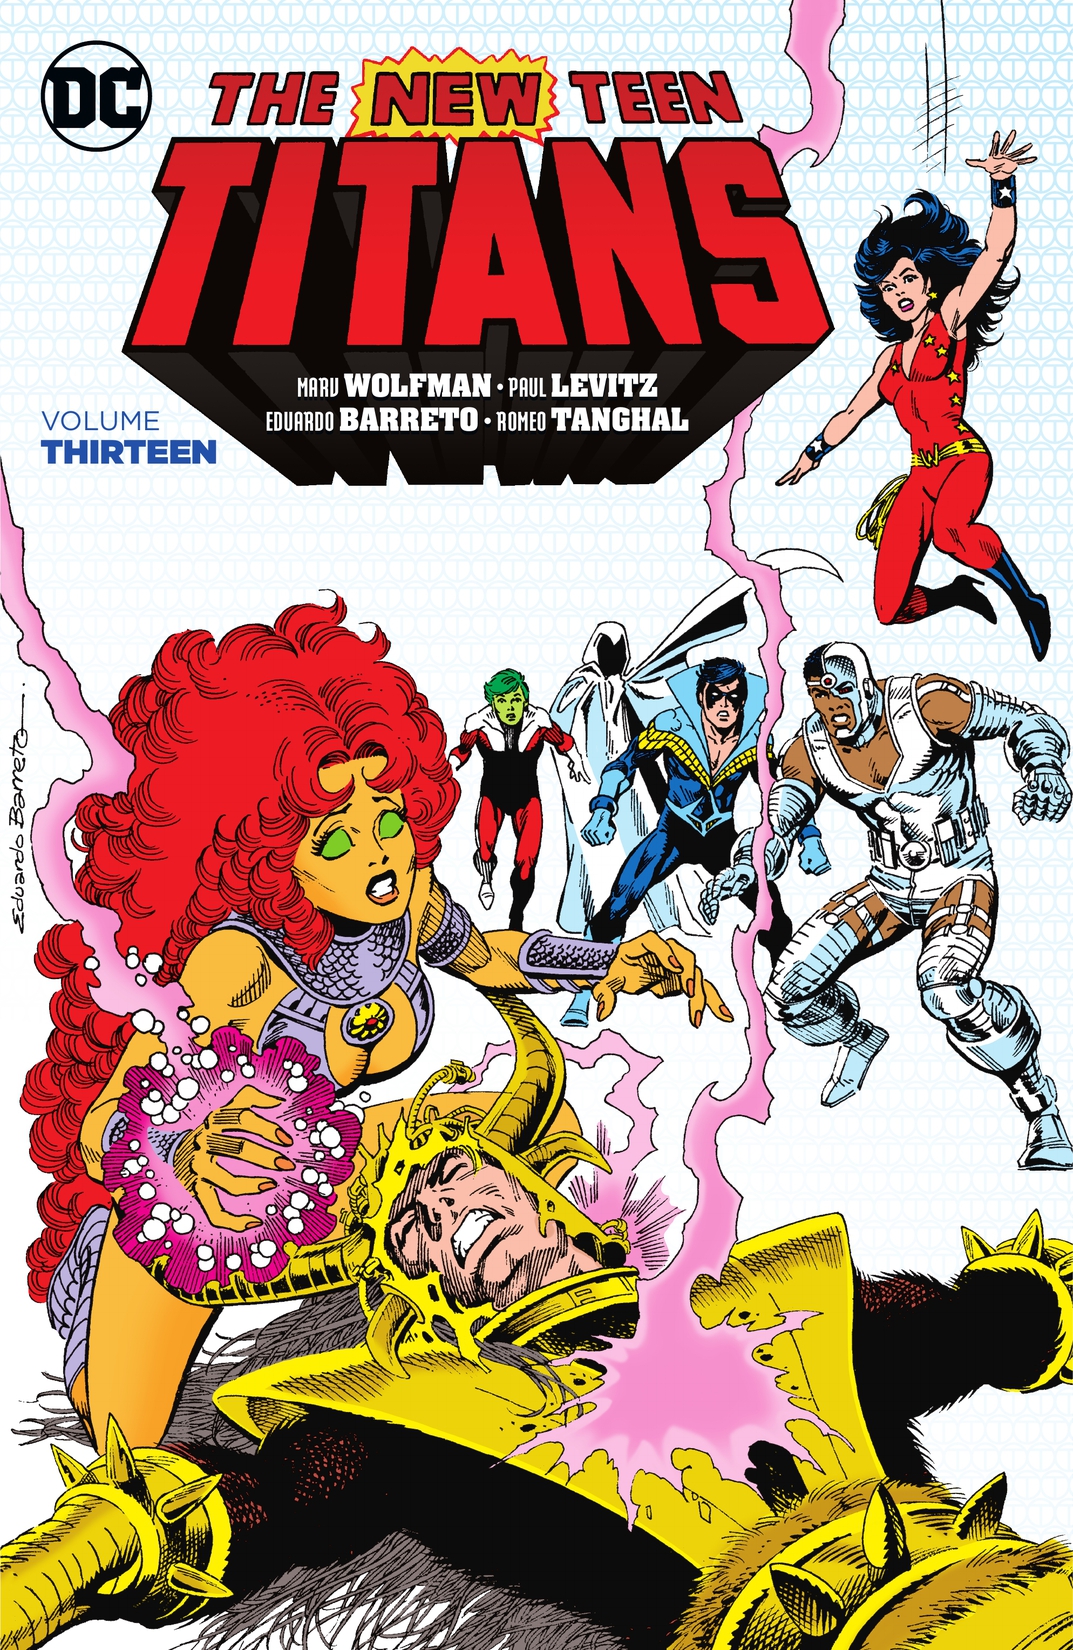 New Teen Titans Vol. 13 preview images